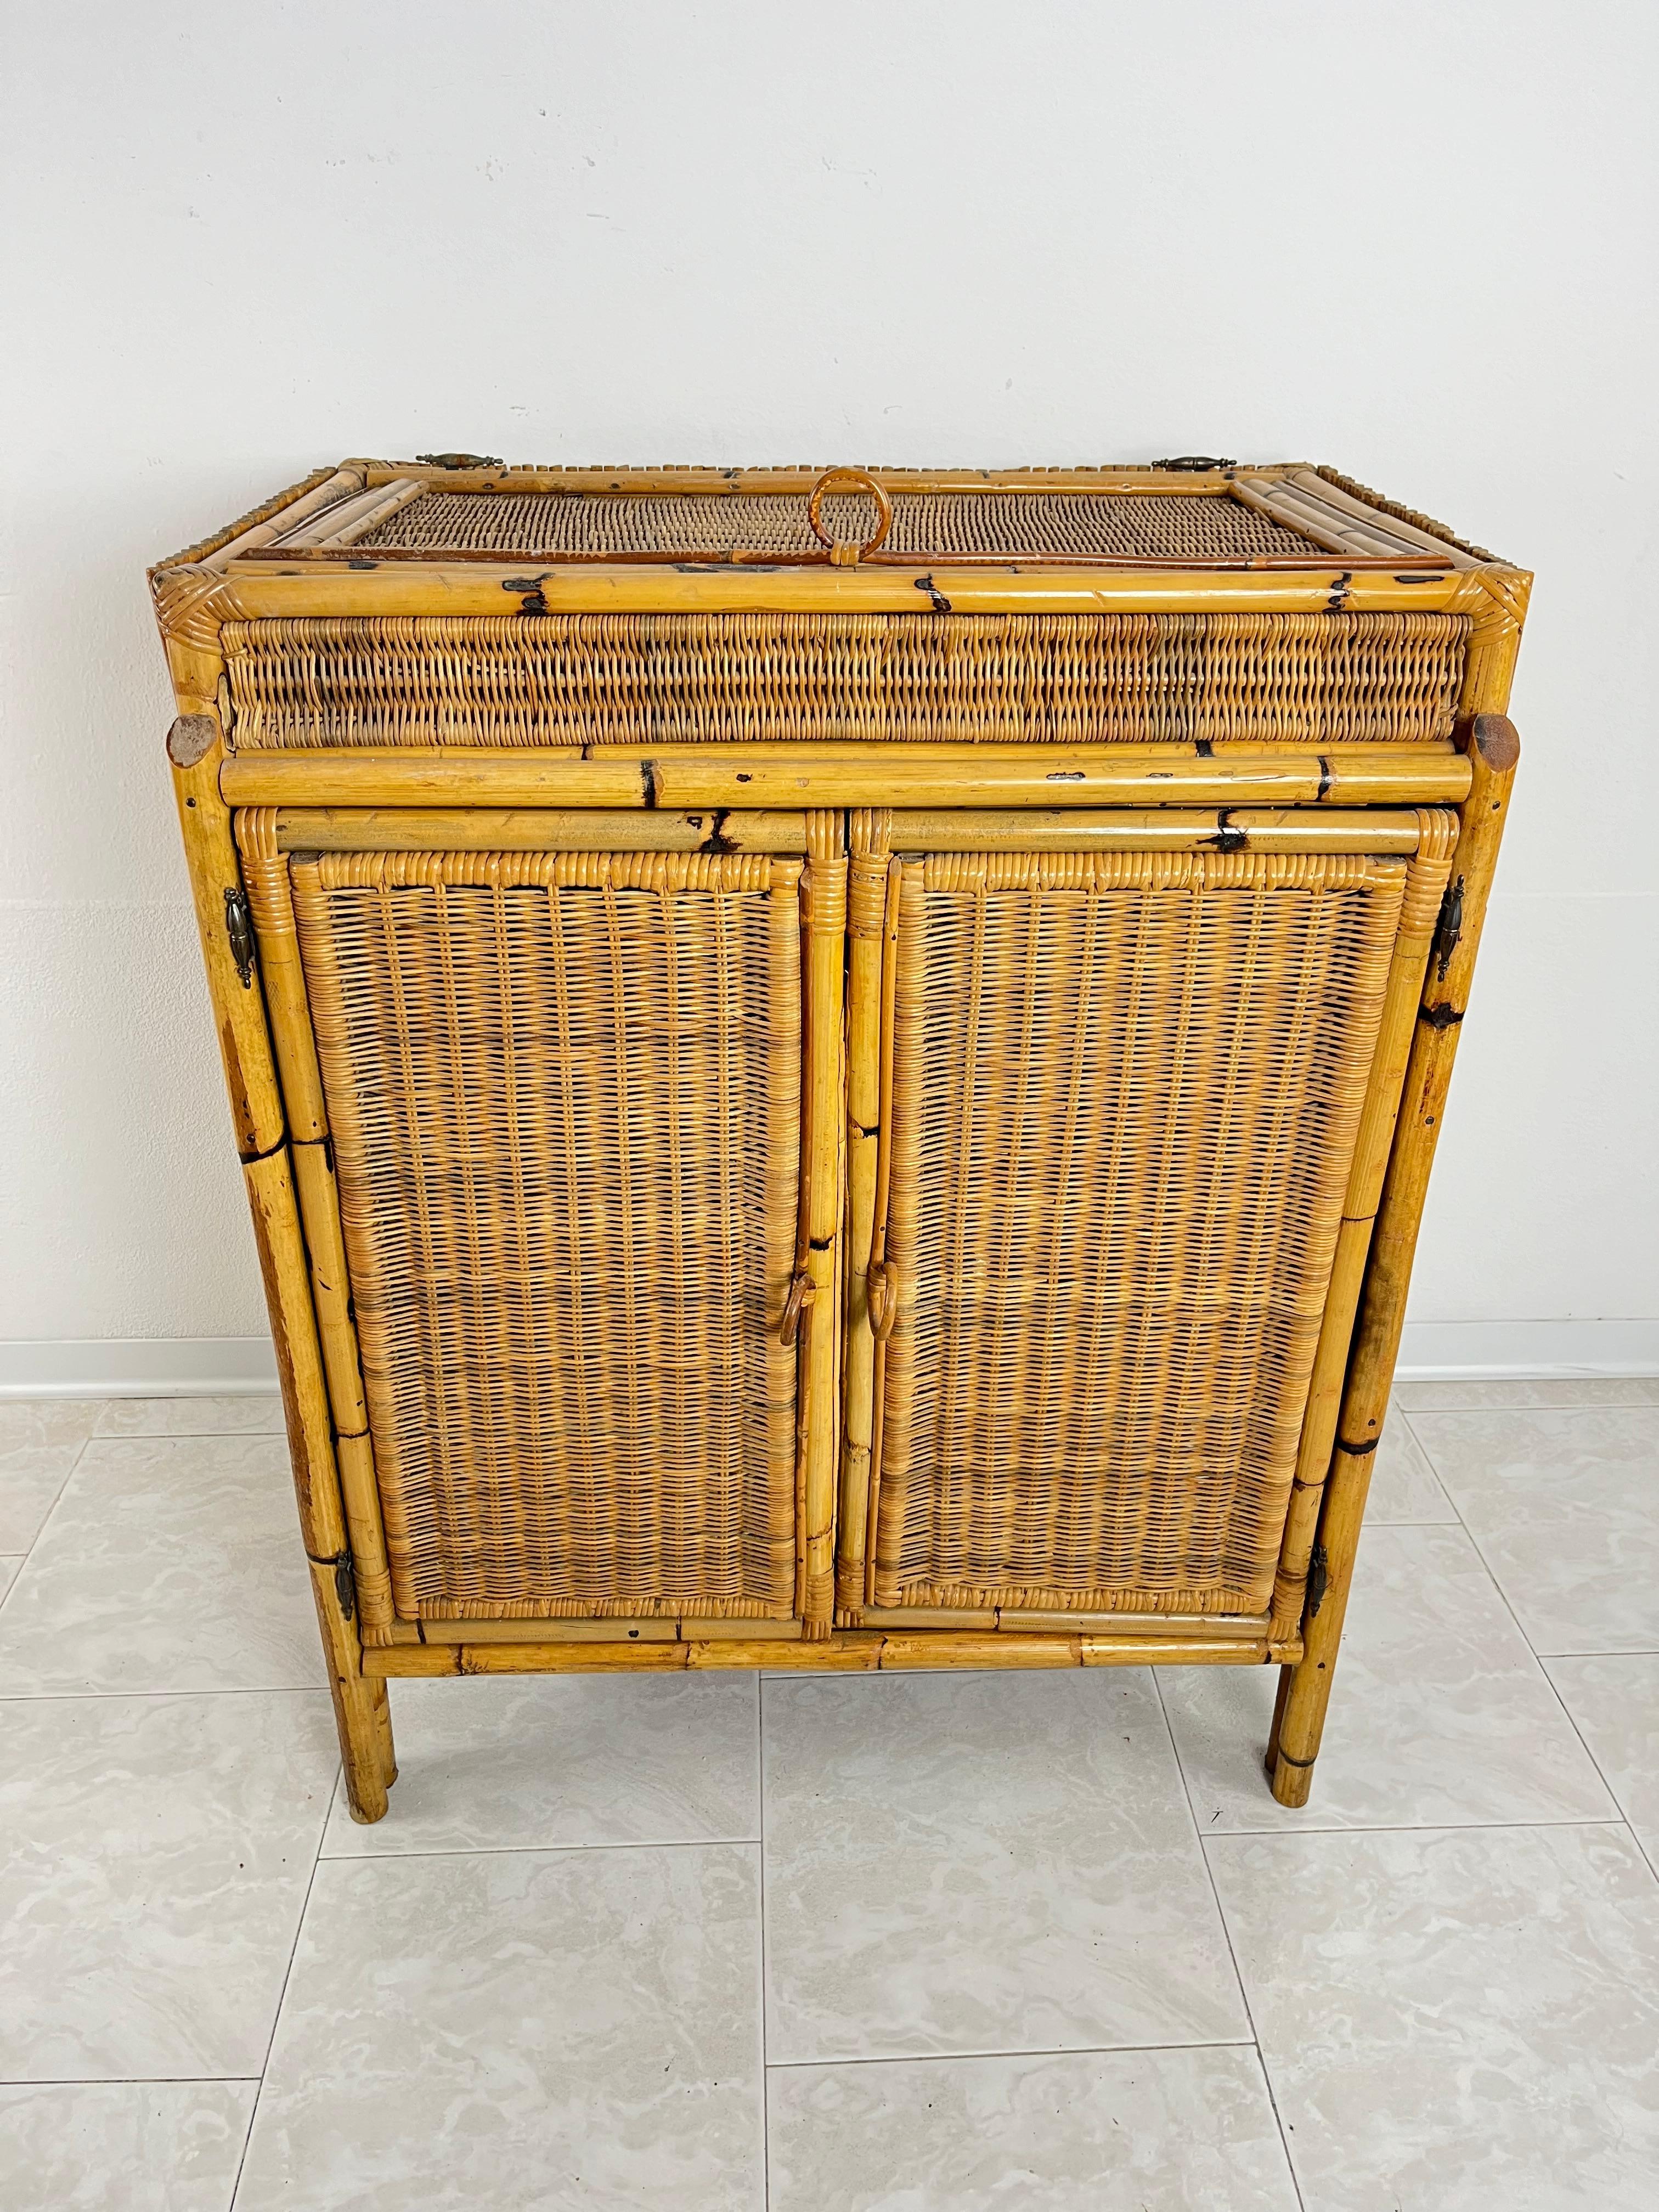 Mid-Century bamboo and rattan sideboard Italian design 1960s attributed to Vittorio Bonacina
Complete and in good condition.